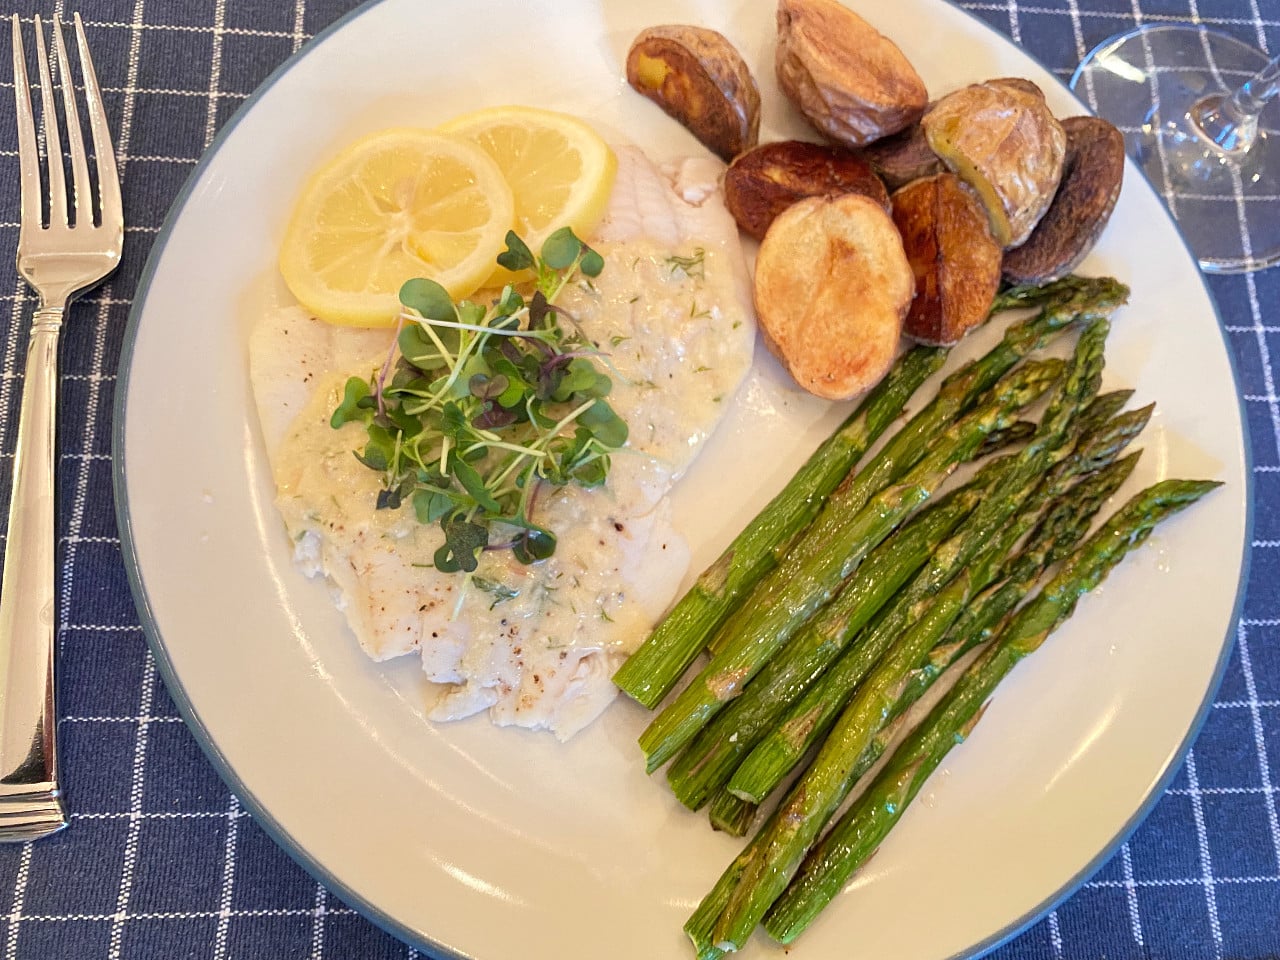 A plate on a blue placemat that has a poached flounder fillet with sauce, roasted potatoes and roasted asparagus.